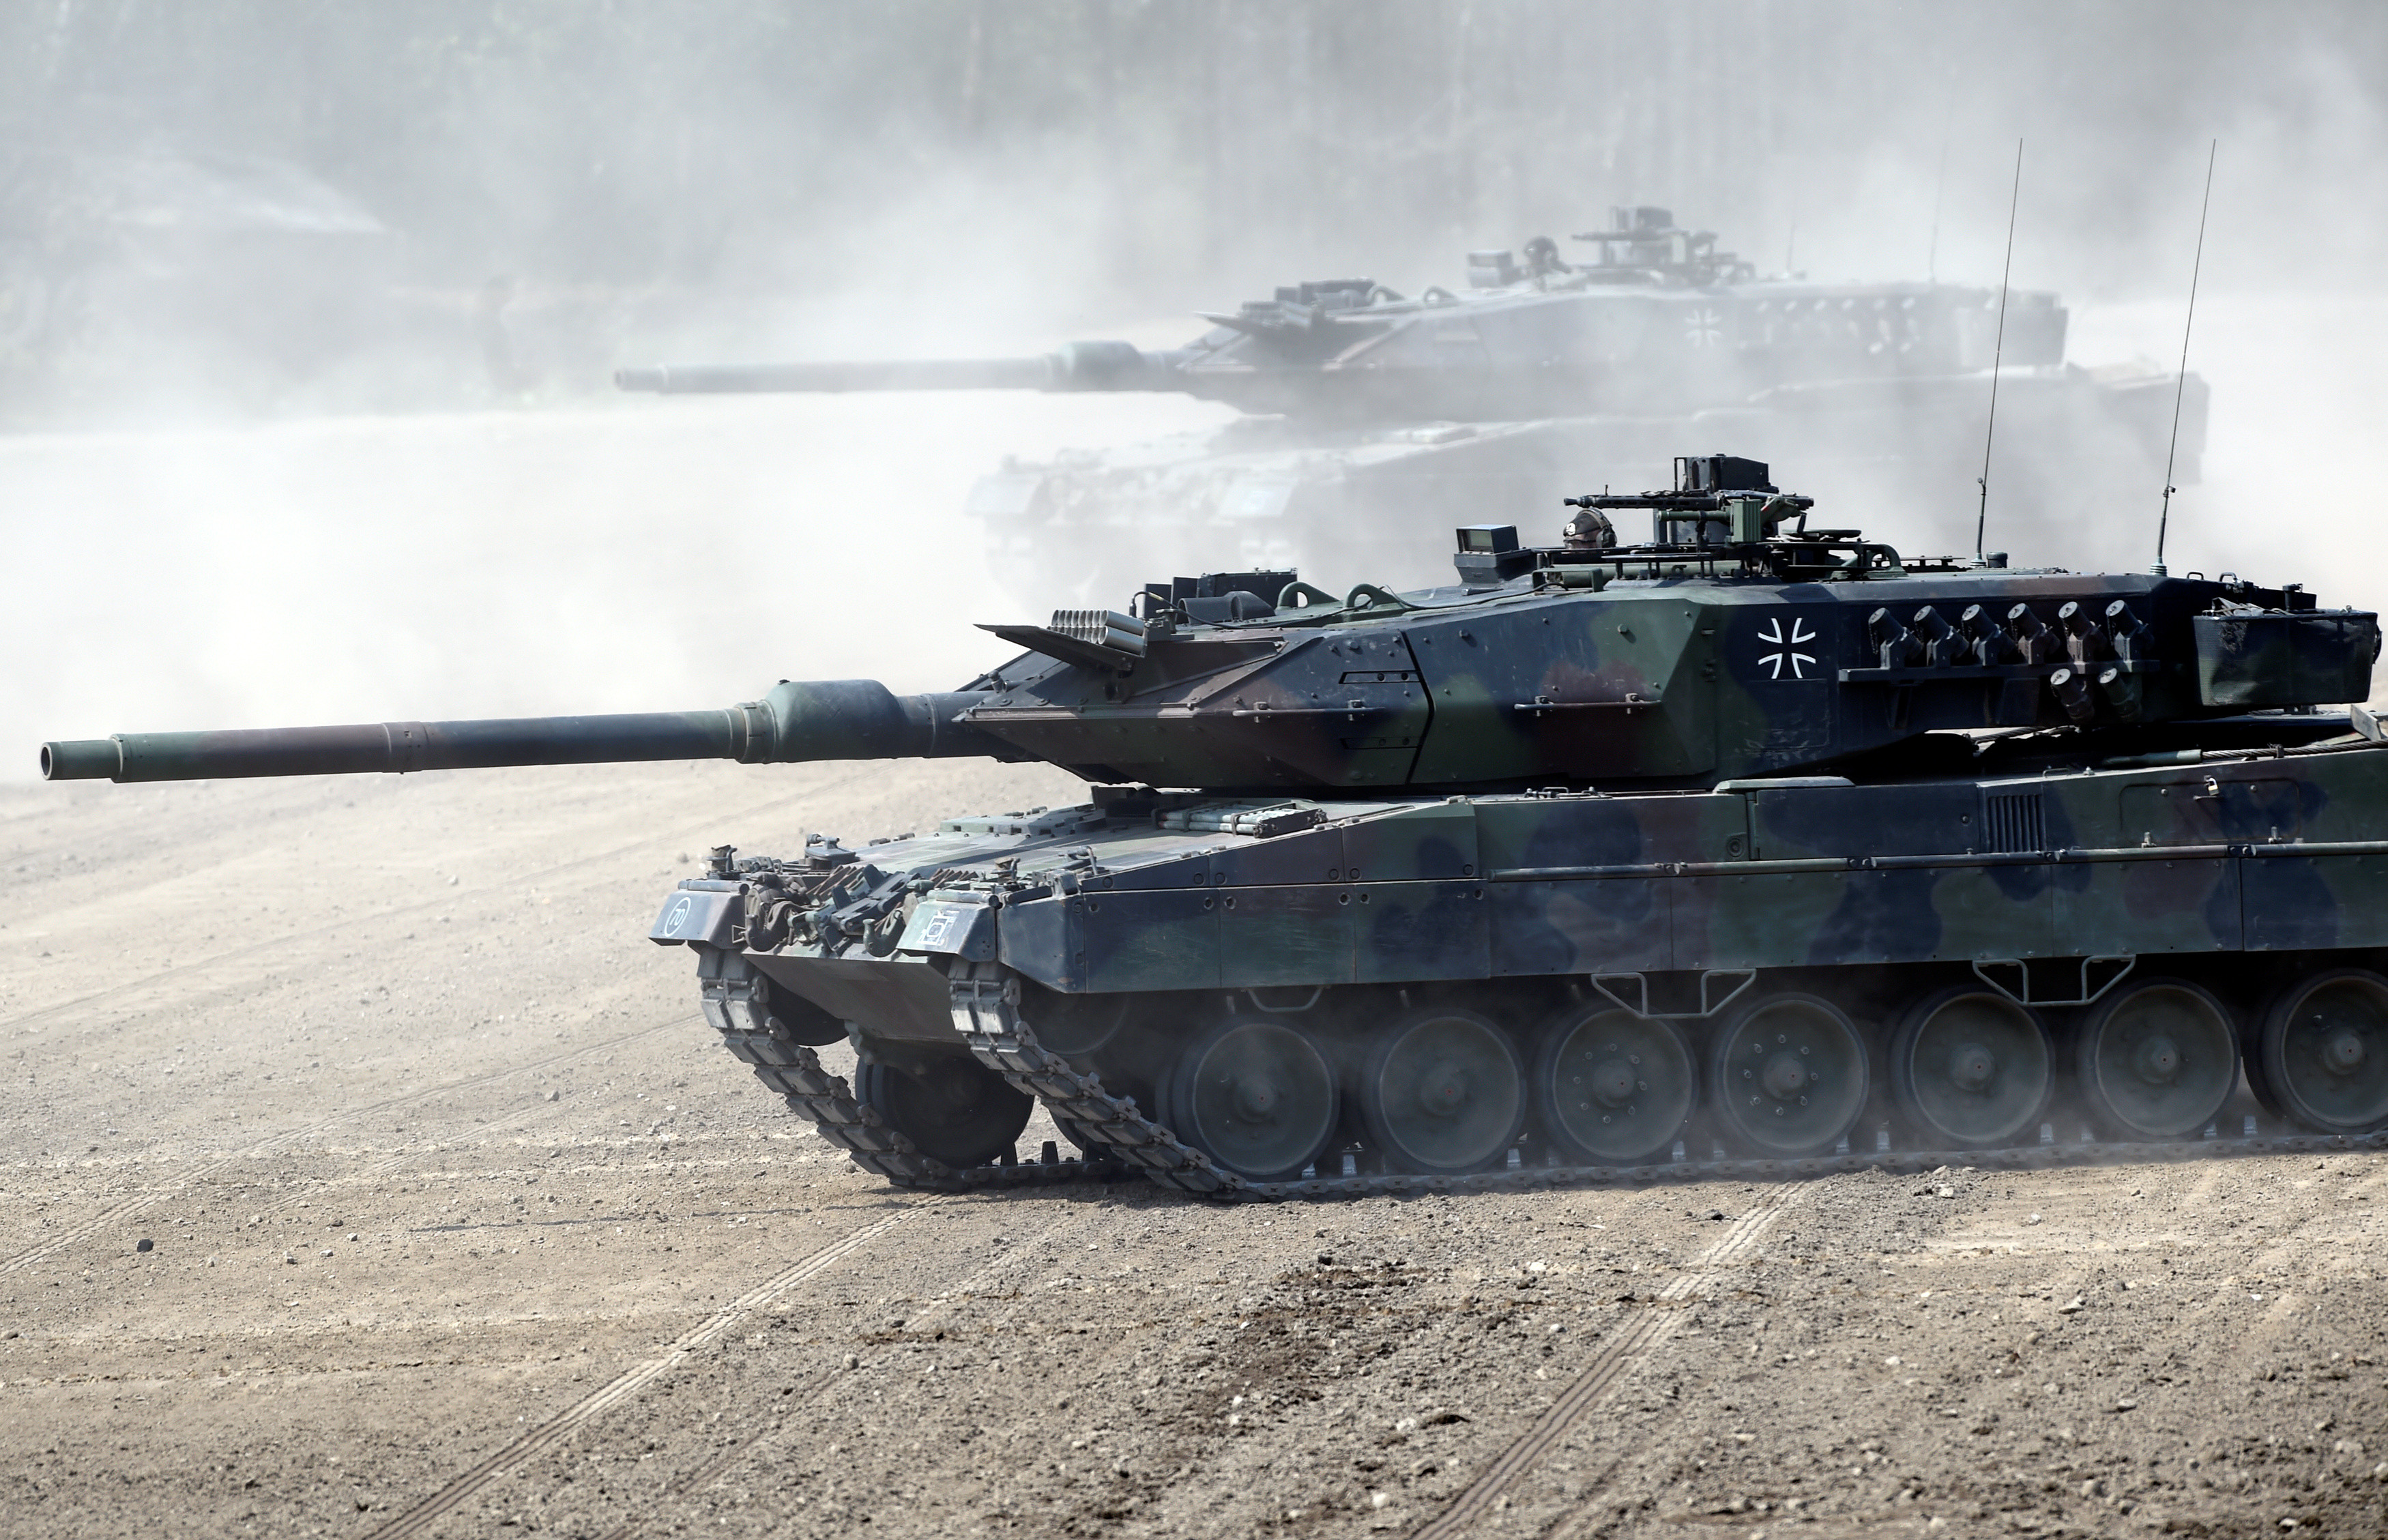 It's official: Canada will transfer 4 Leopard 2 tanks to Ukraine